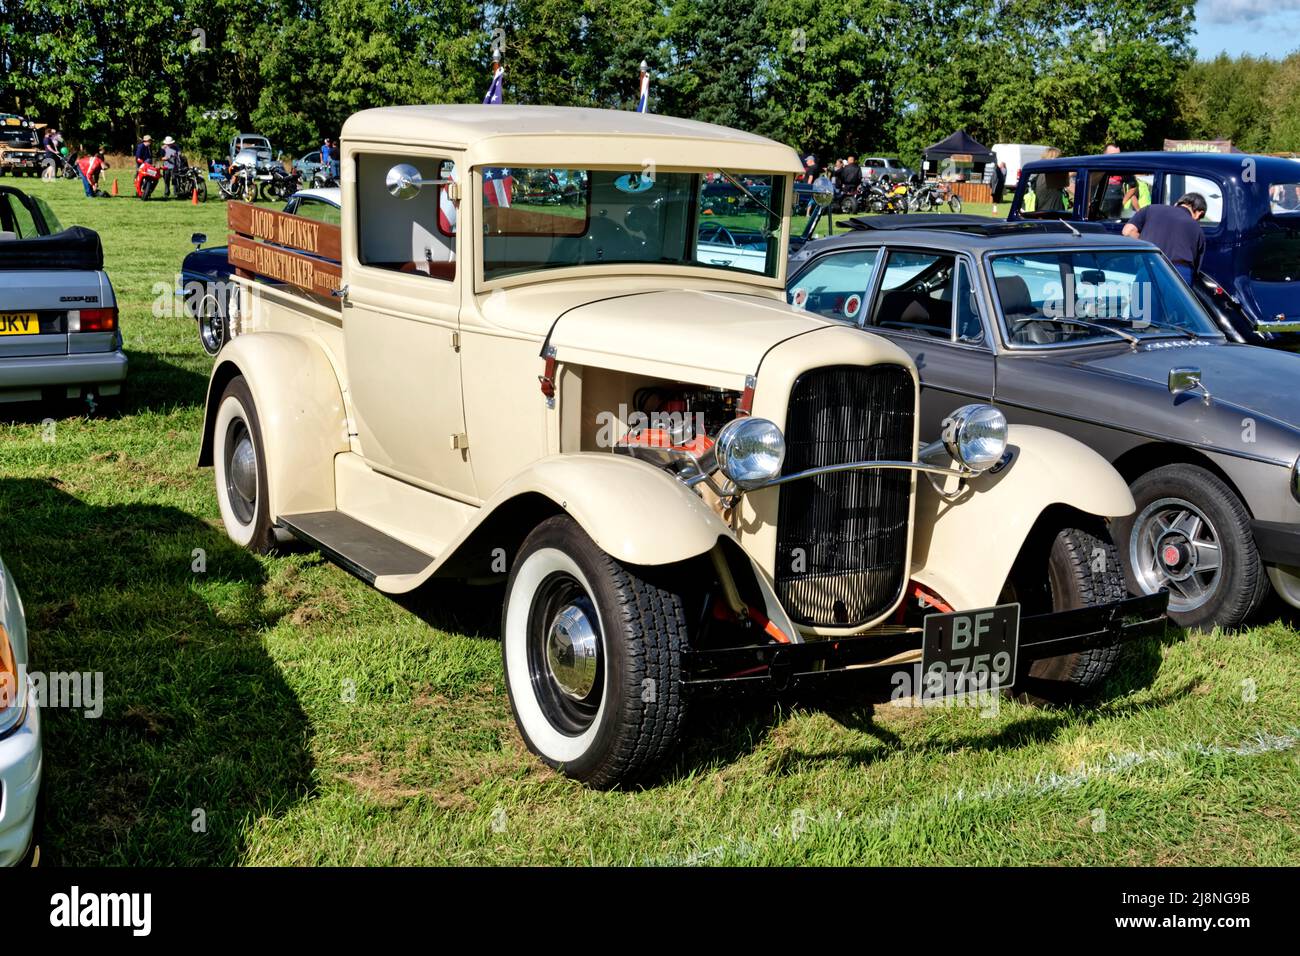 Westbury, Wiltshire, UK - September 1 2019:1930 Ford Model A Pick Up Truck 355 Ci V8 Hotrod, BF 8759, at the Westbury White Horse Classic Vehicle Show Stock Photo